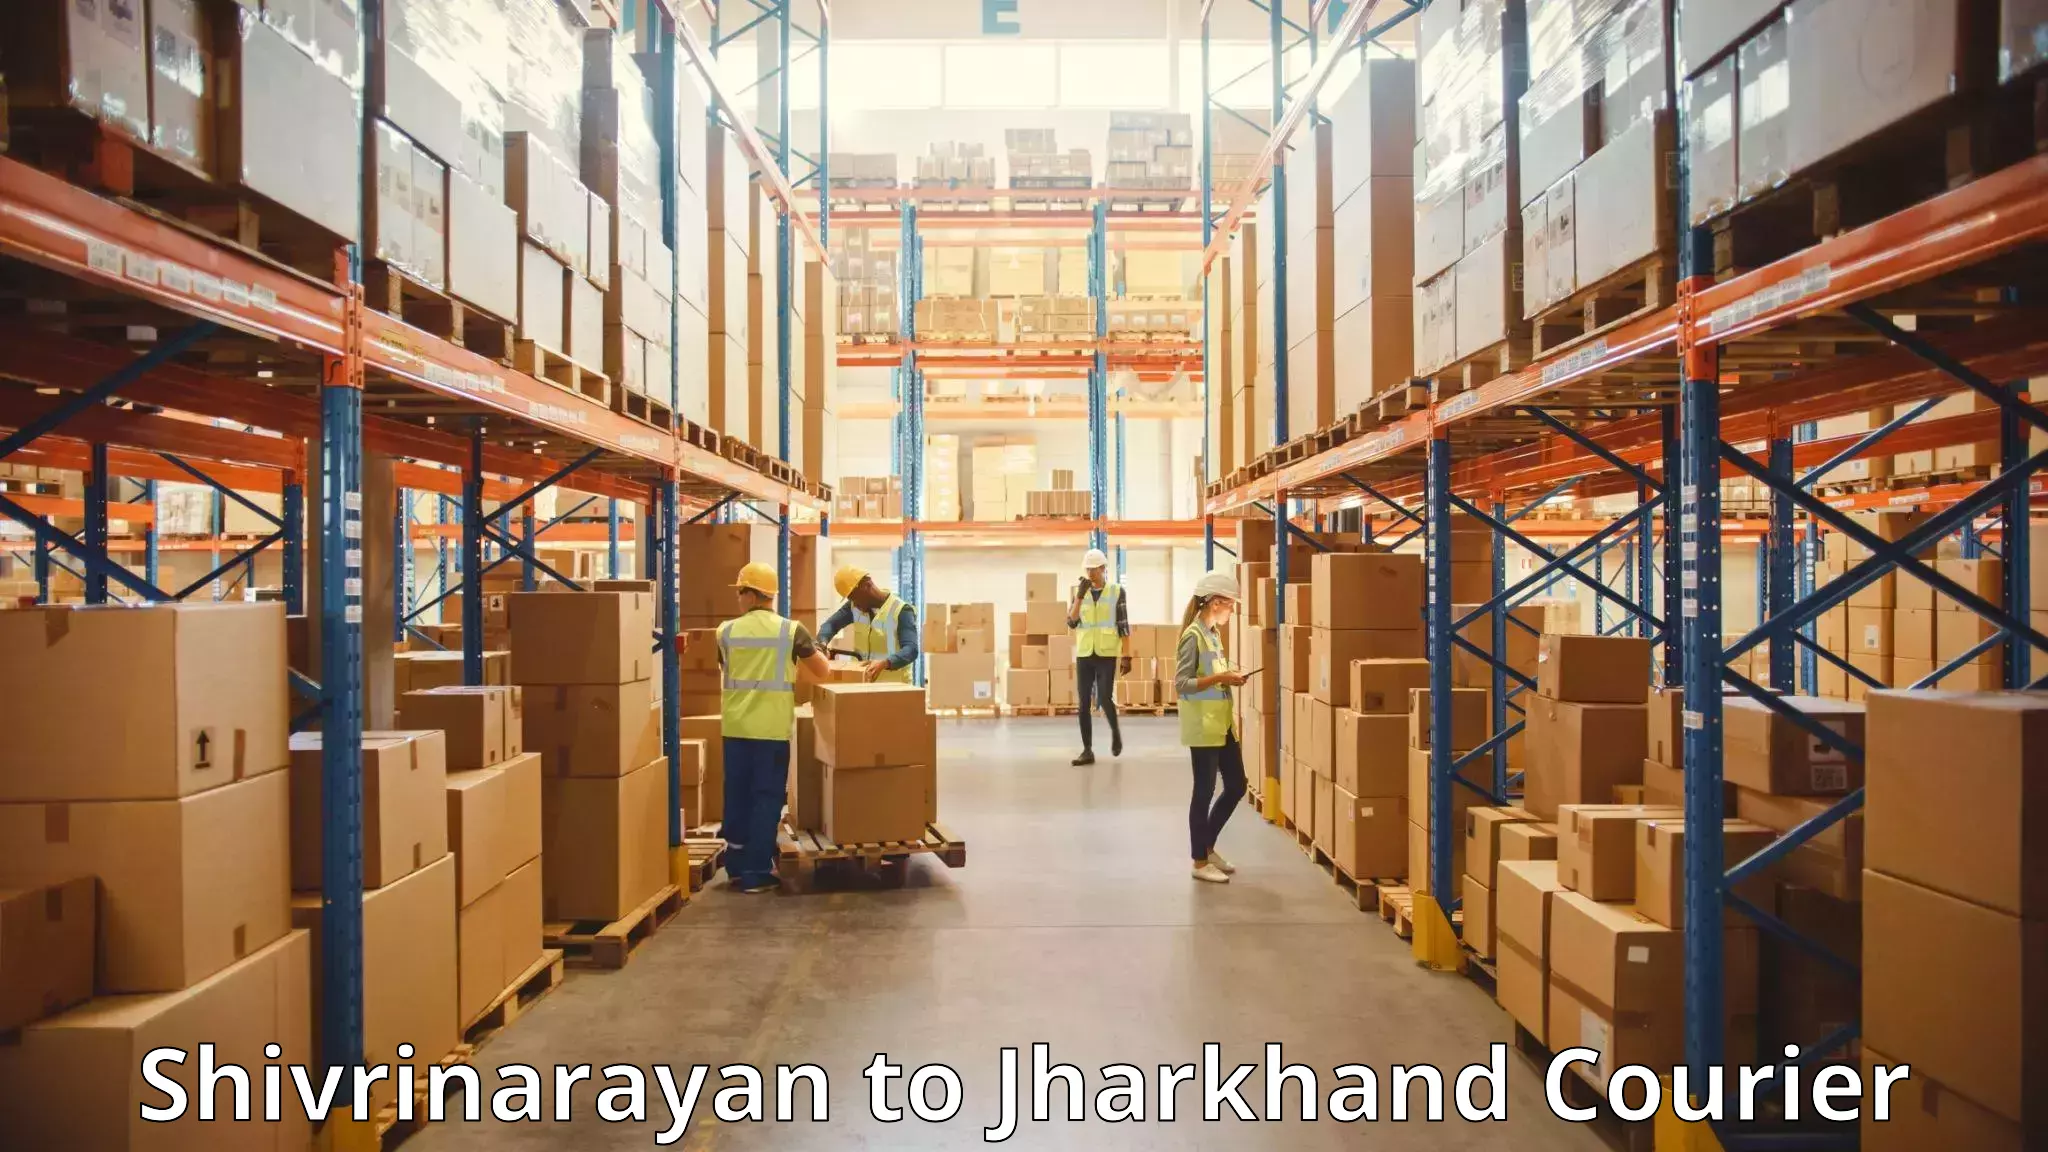 Luggage transport consulting Shivrinarayan to Jharkhand